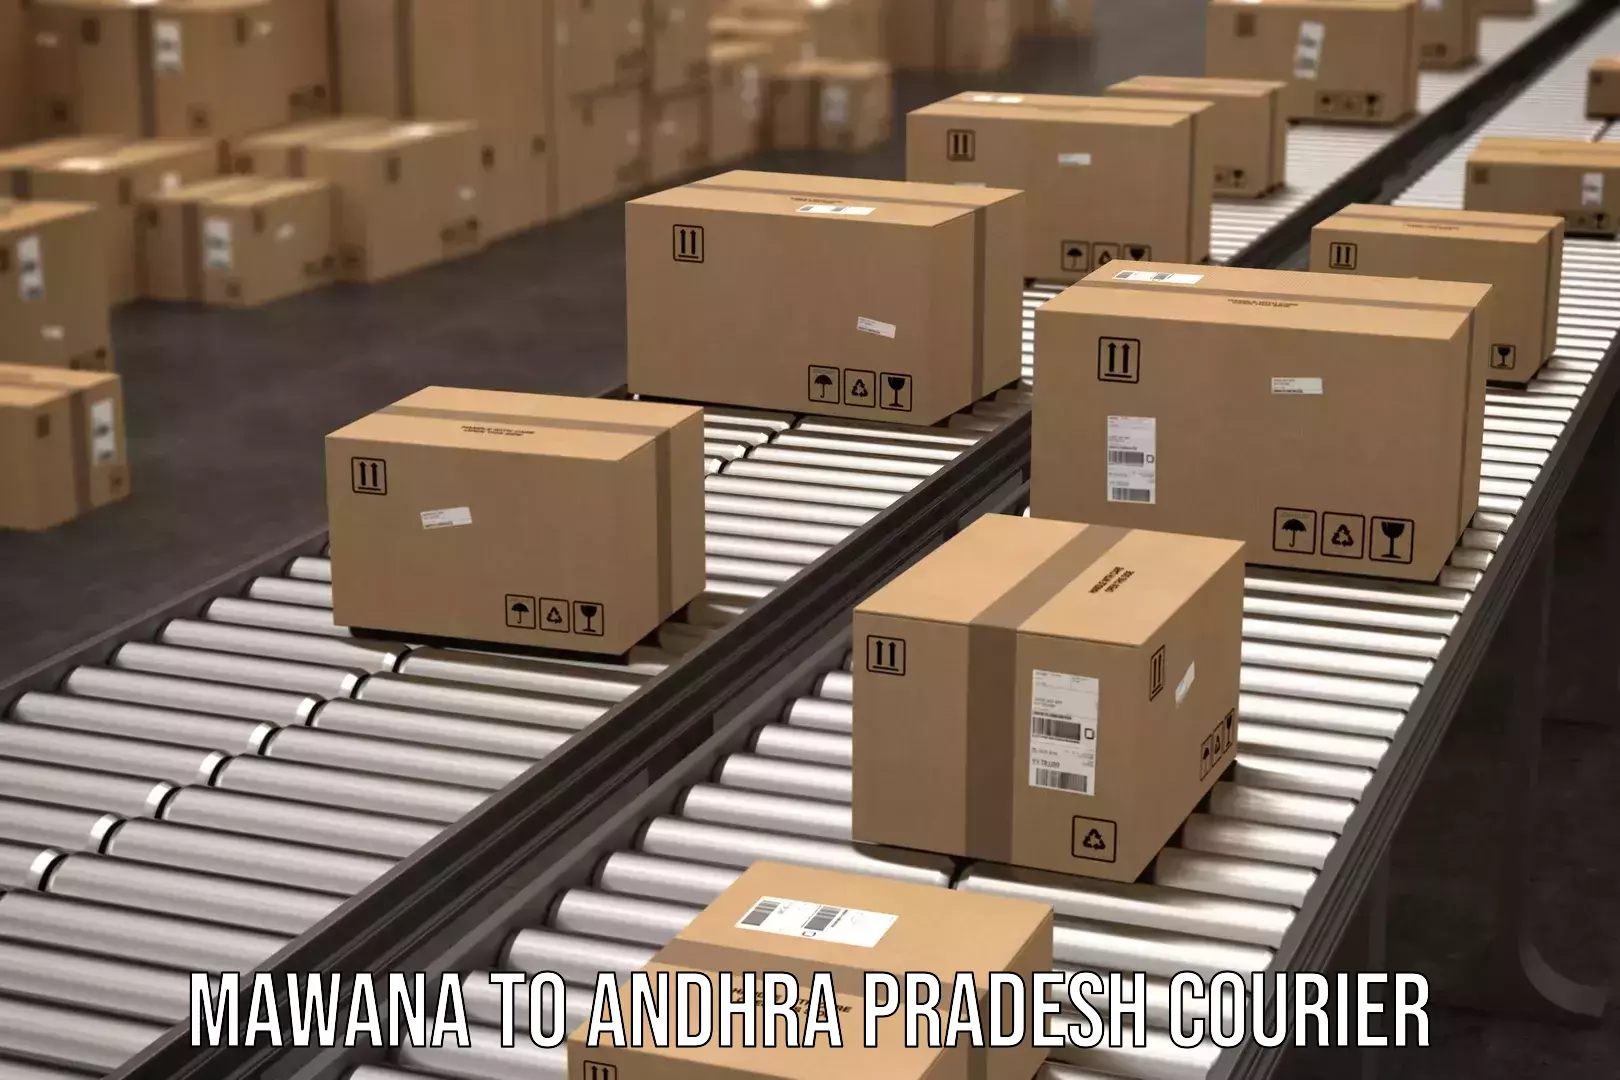 Full-service courier options in Mawana to Mangalagiri